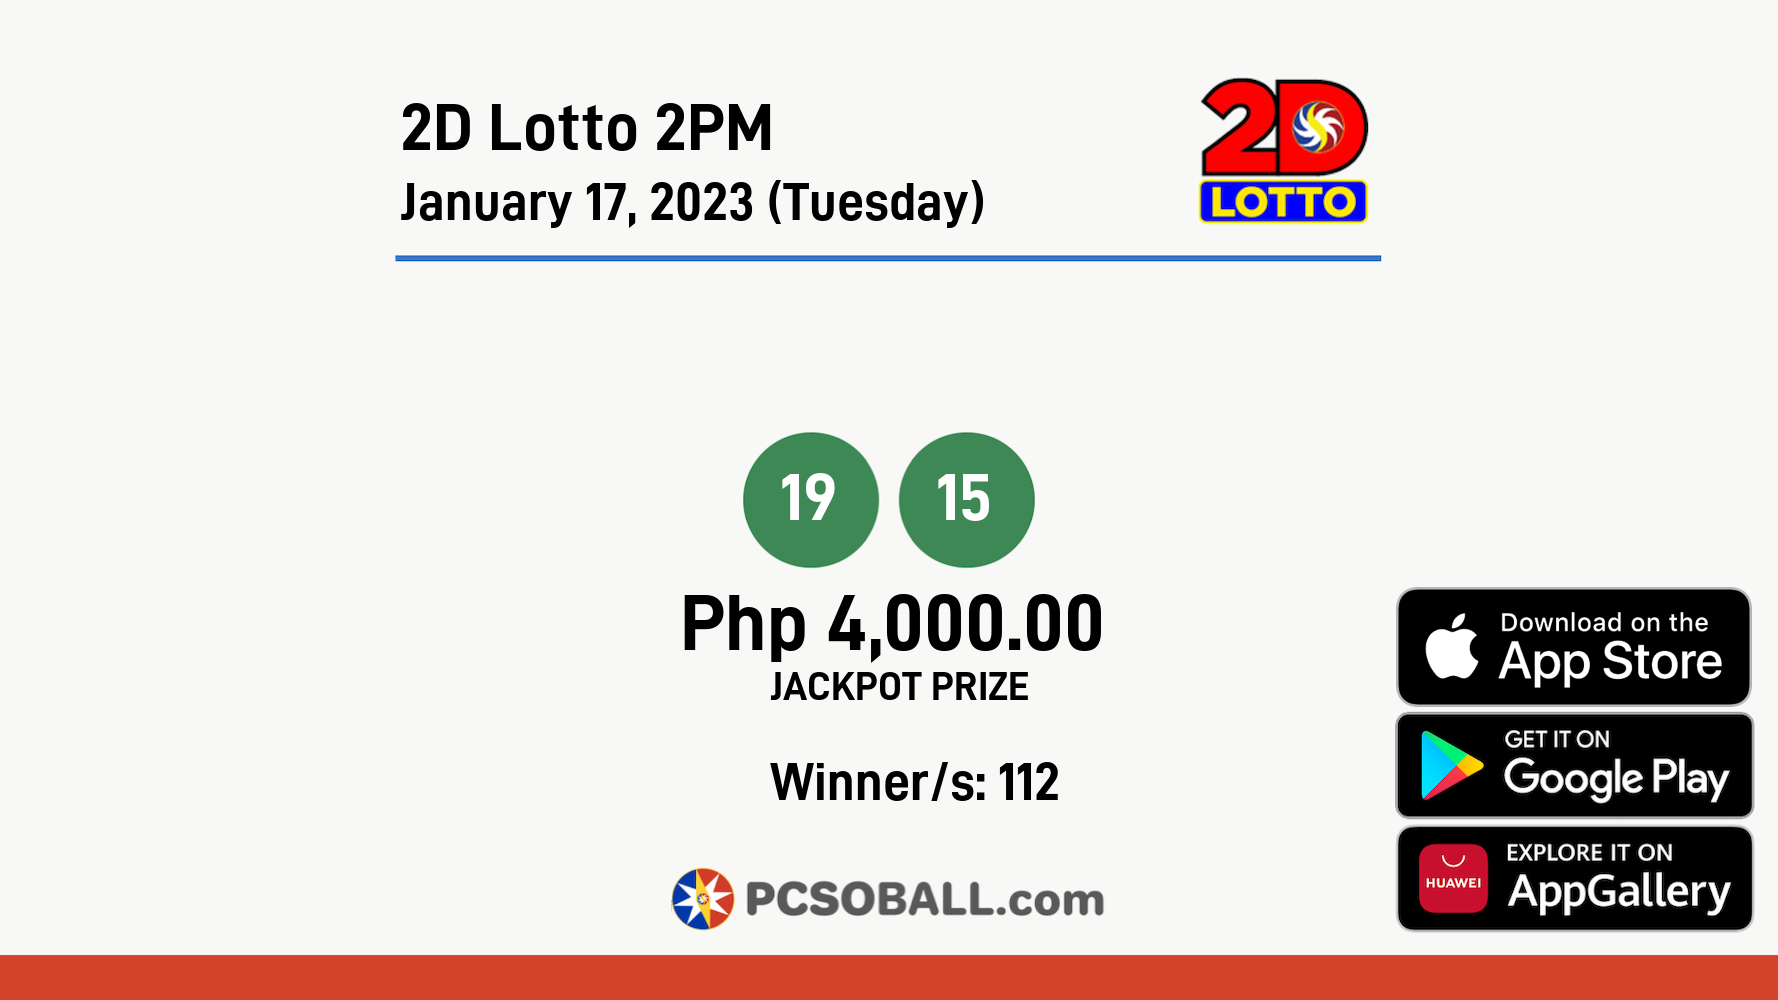 2D Lotto 2PM January 17, 2023 (Tuesday) Result